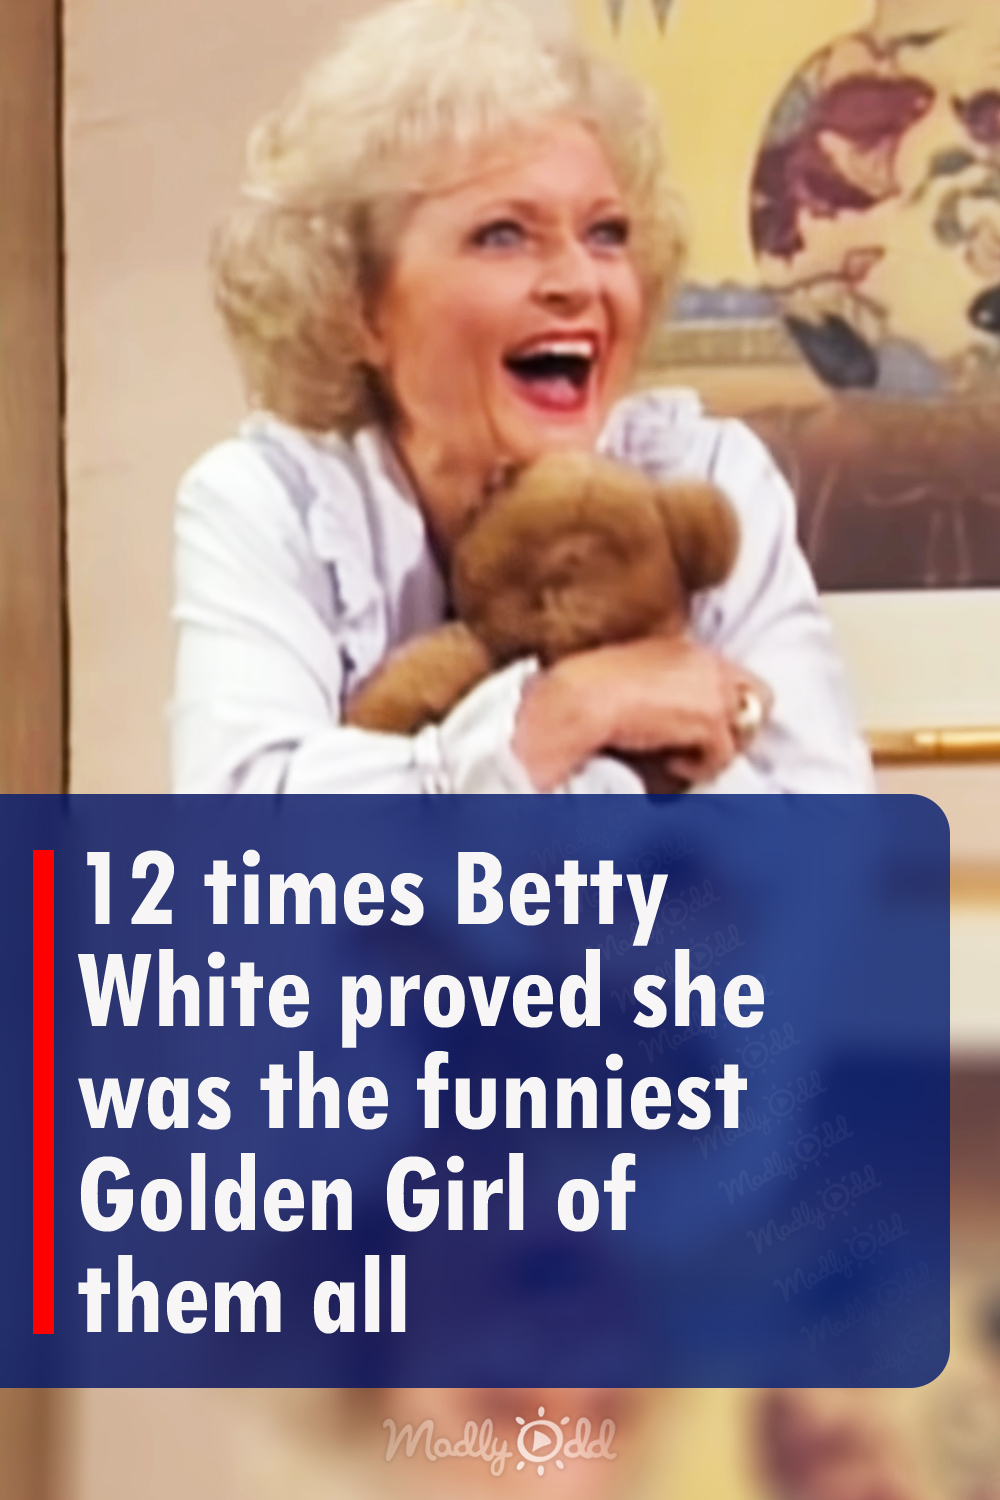 12 times Betty White proved she was the funniest Golden Girl of them all